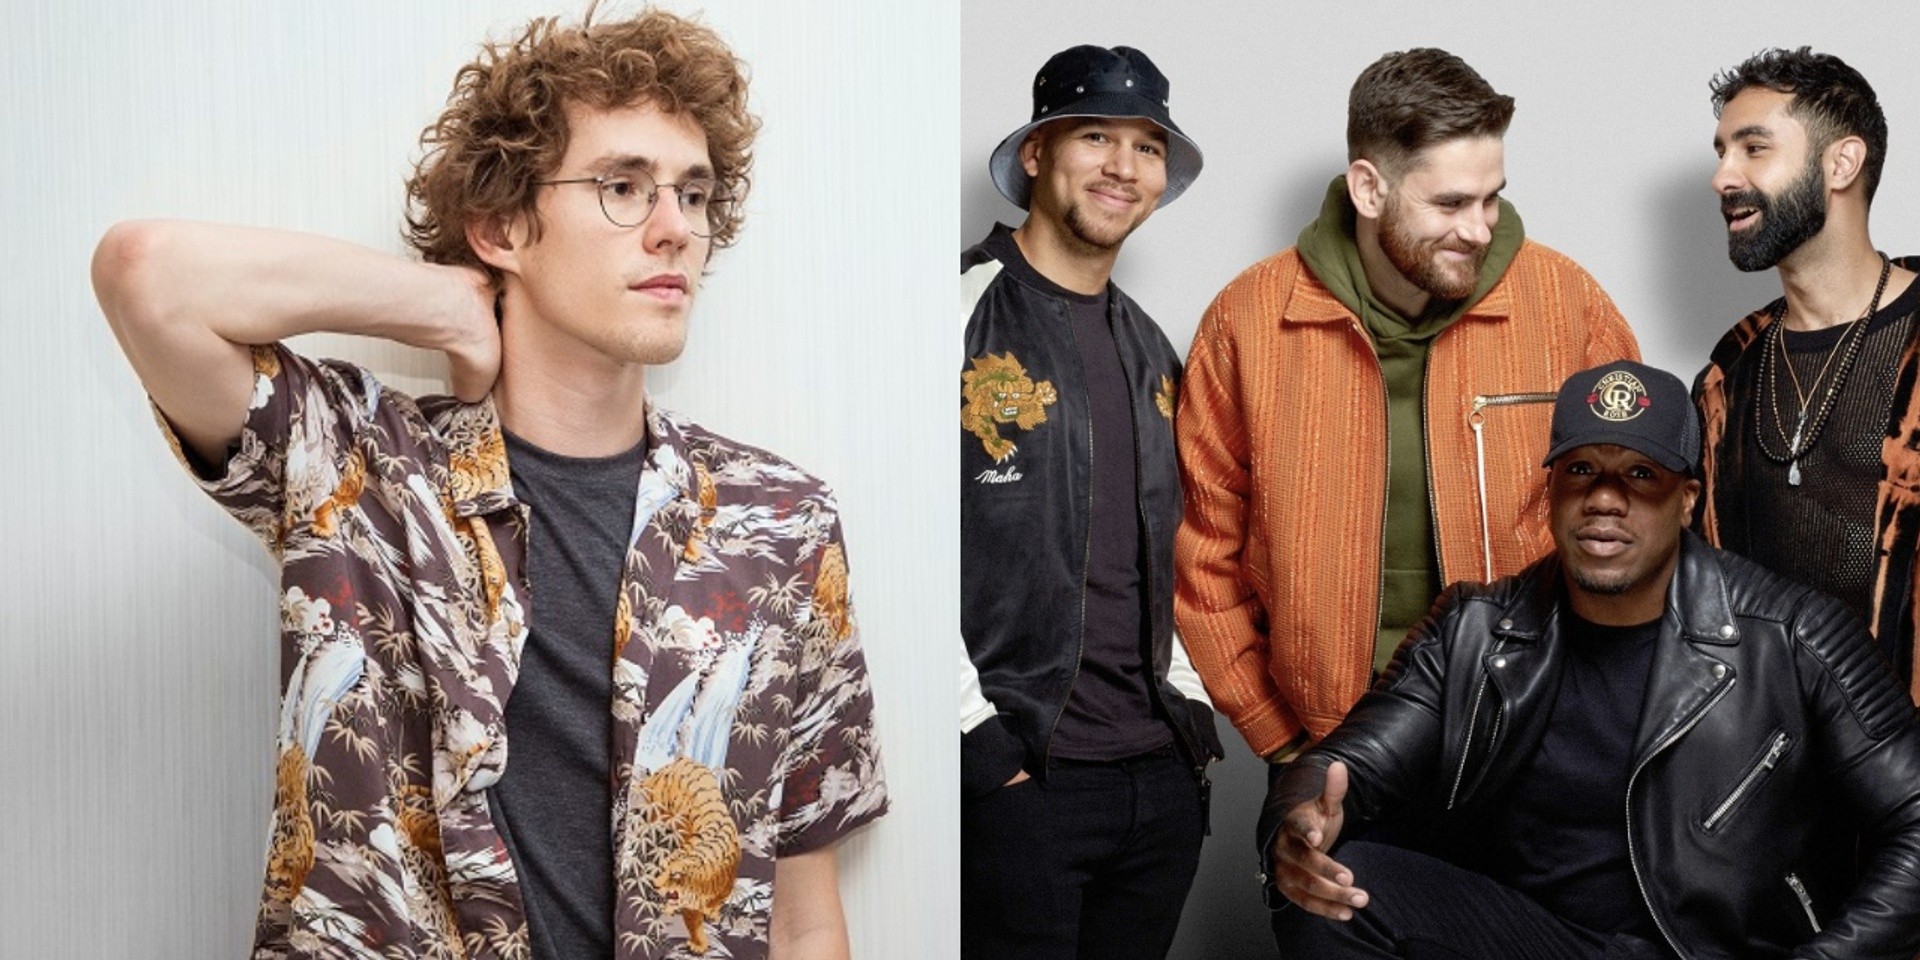 Rudimental and Lost Frequencies to perform at AIA Glow Festival 2019 